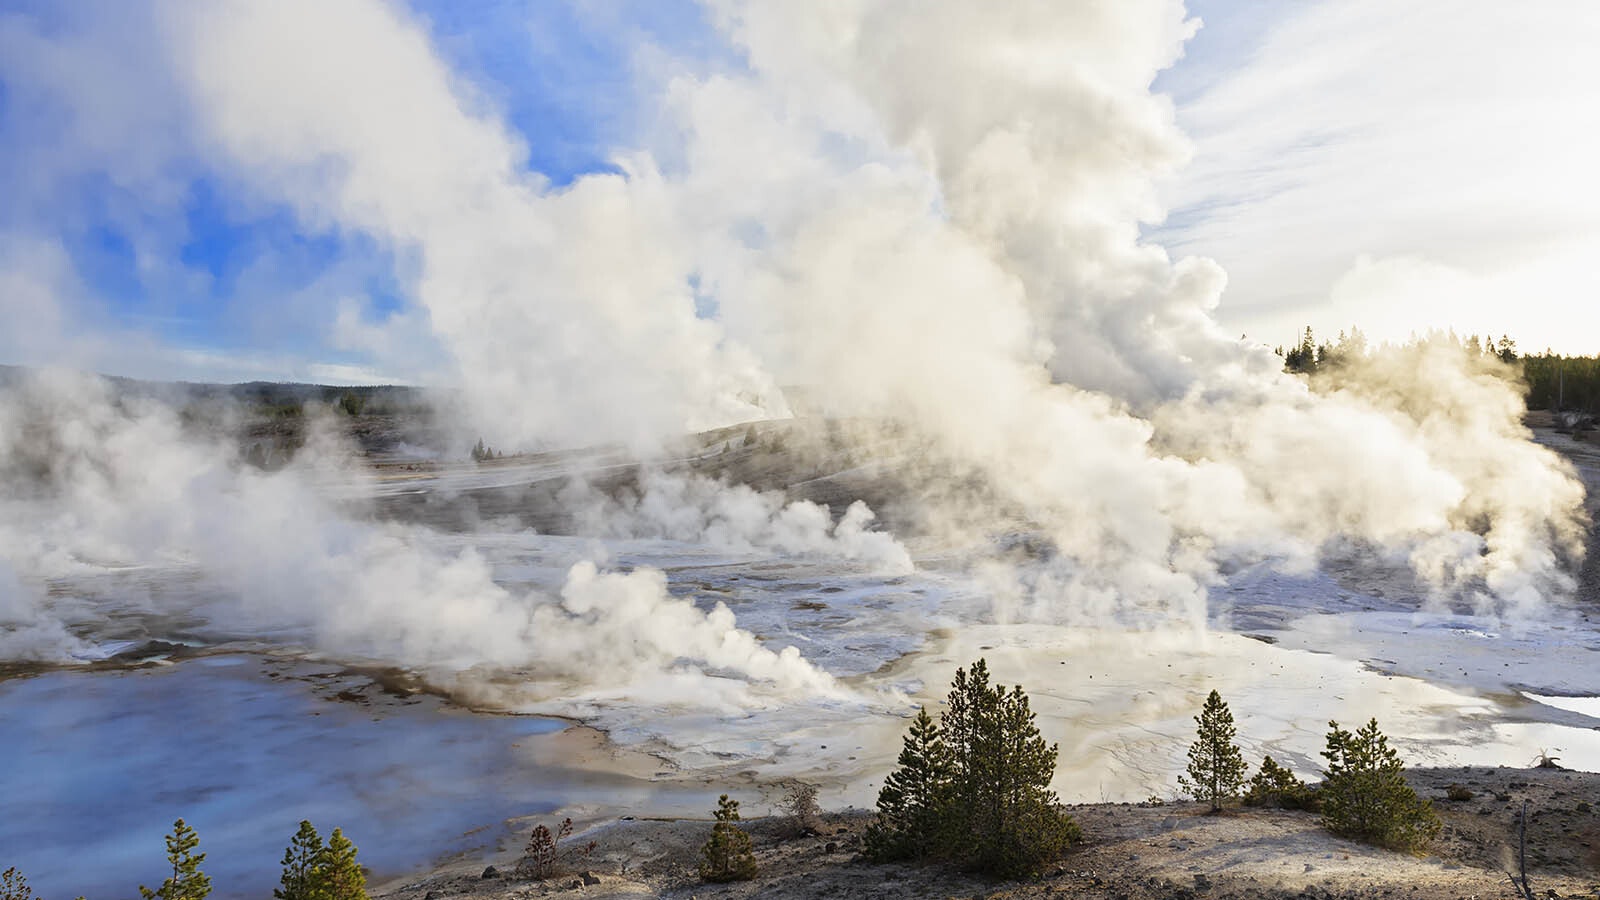 The Norris Geyser Basin in Yellowstone National Park looks like a primordial volcanic field waiting to erupt.